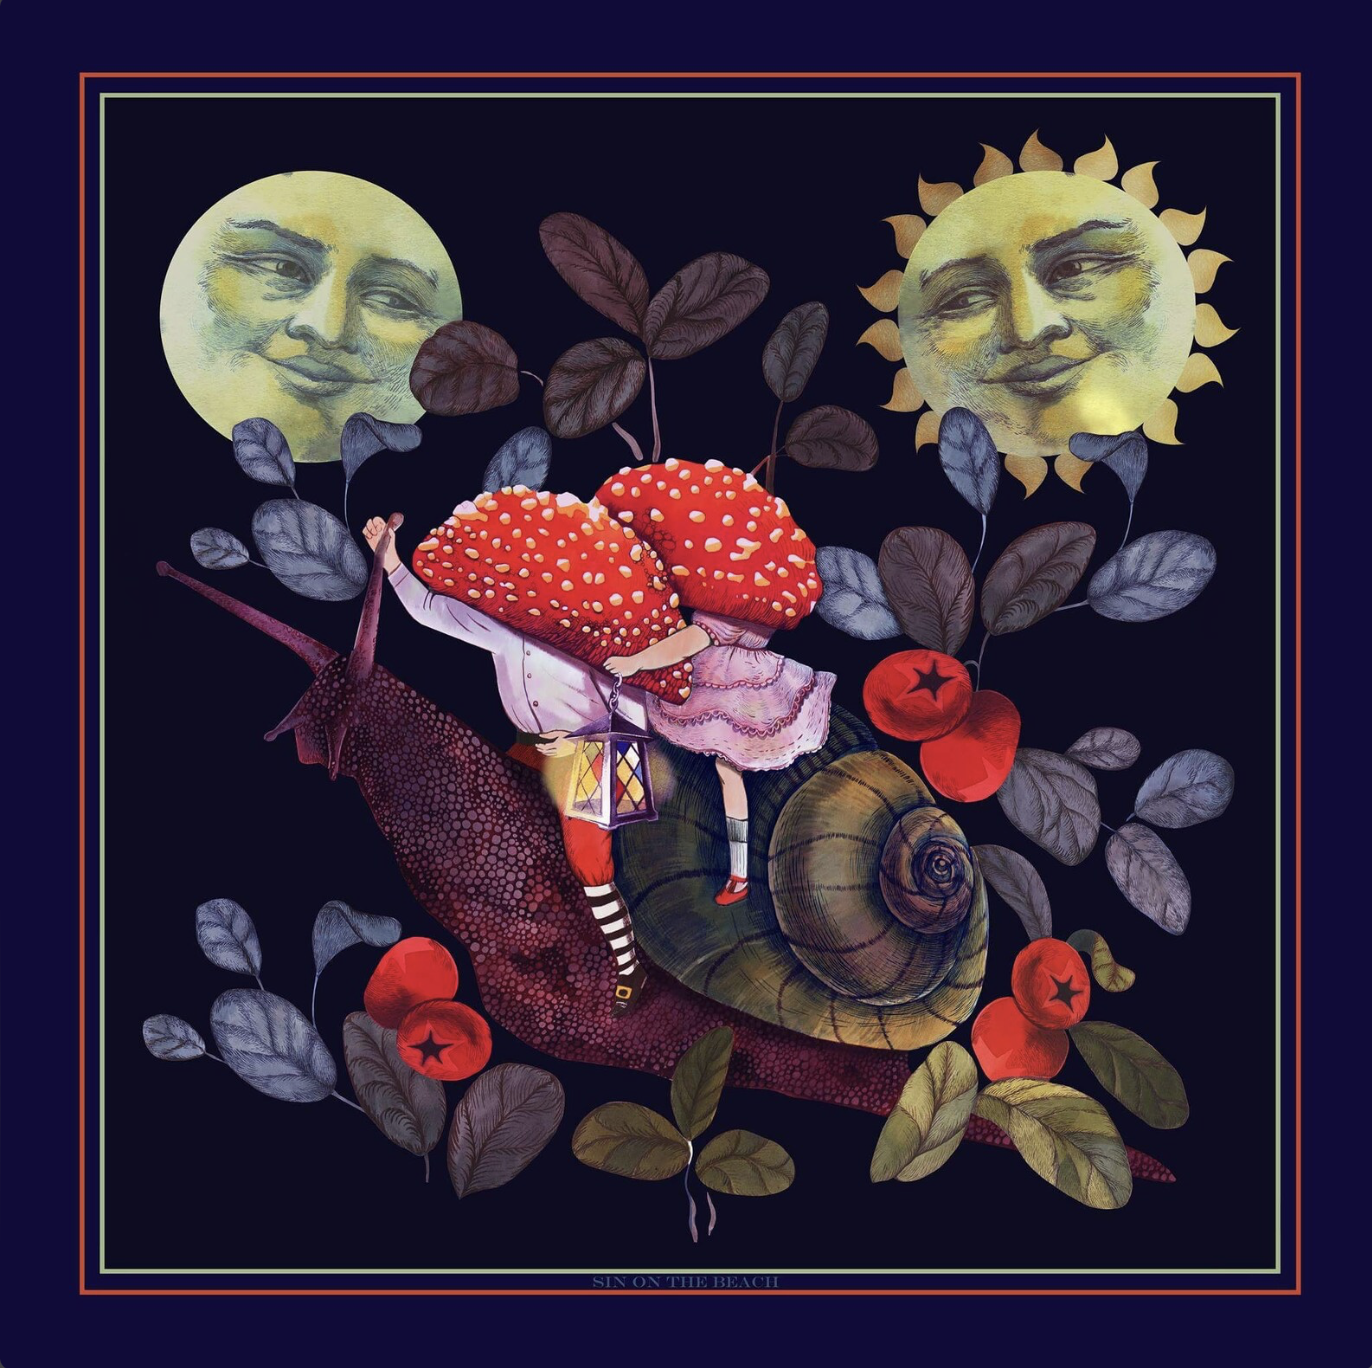 image-of-twill-silk-scarf-featuring-a-moon-and-sun-and-two-mushroom-headed-characters